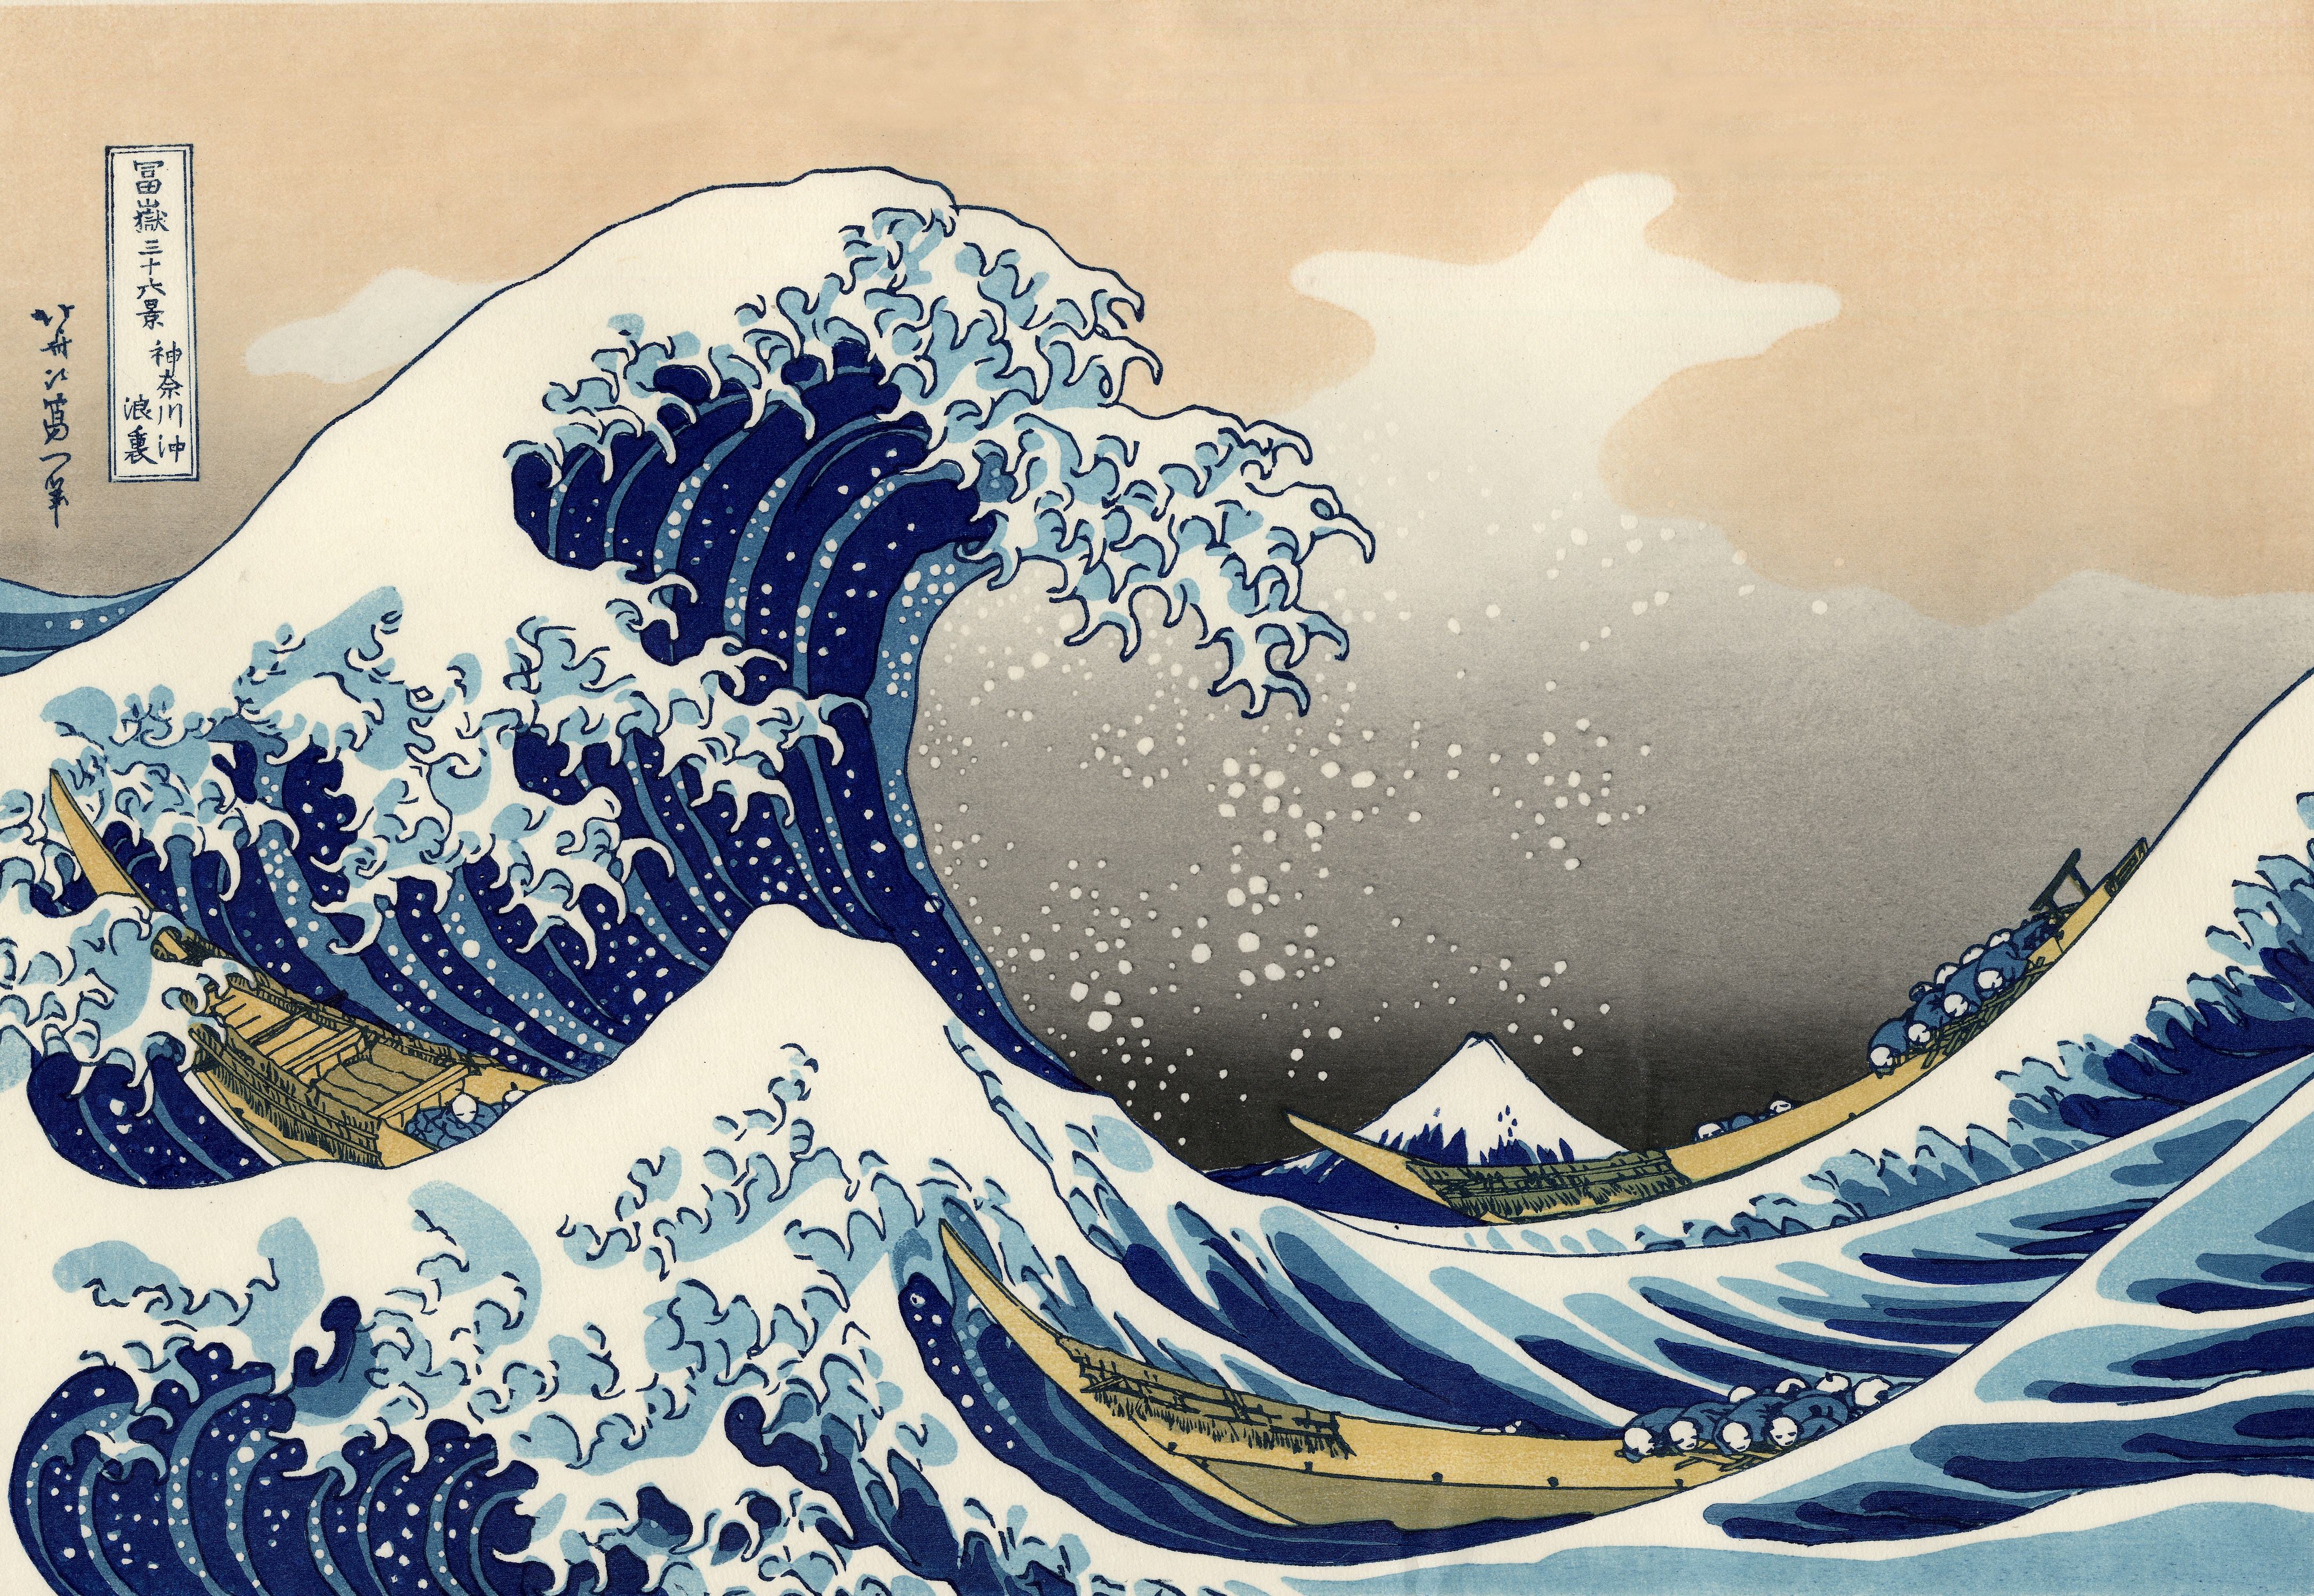 wave, the great wave off kanagawa, artistic cellphone